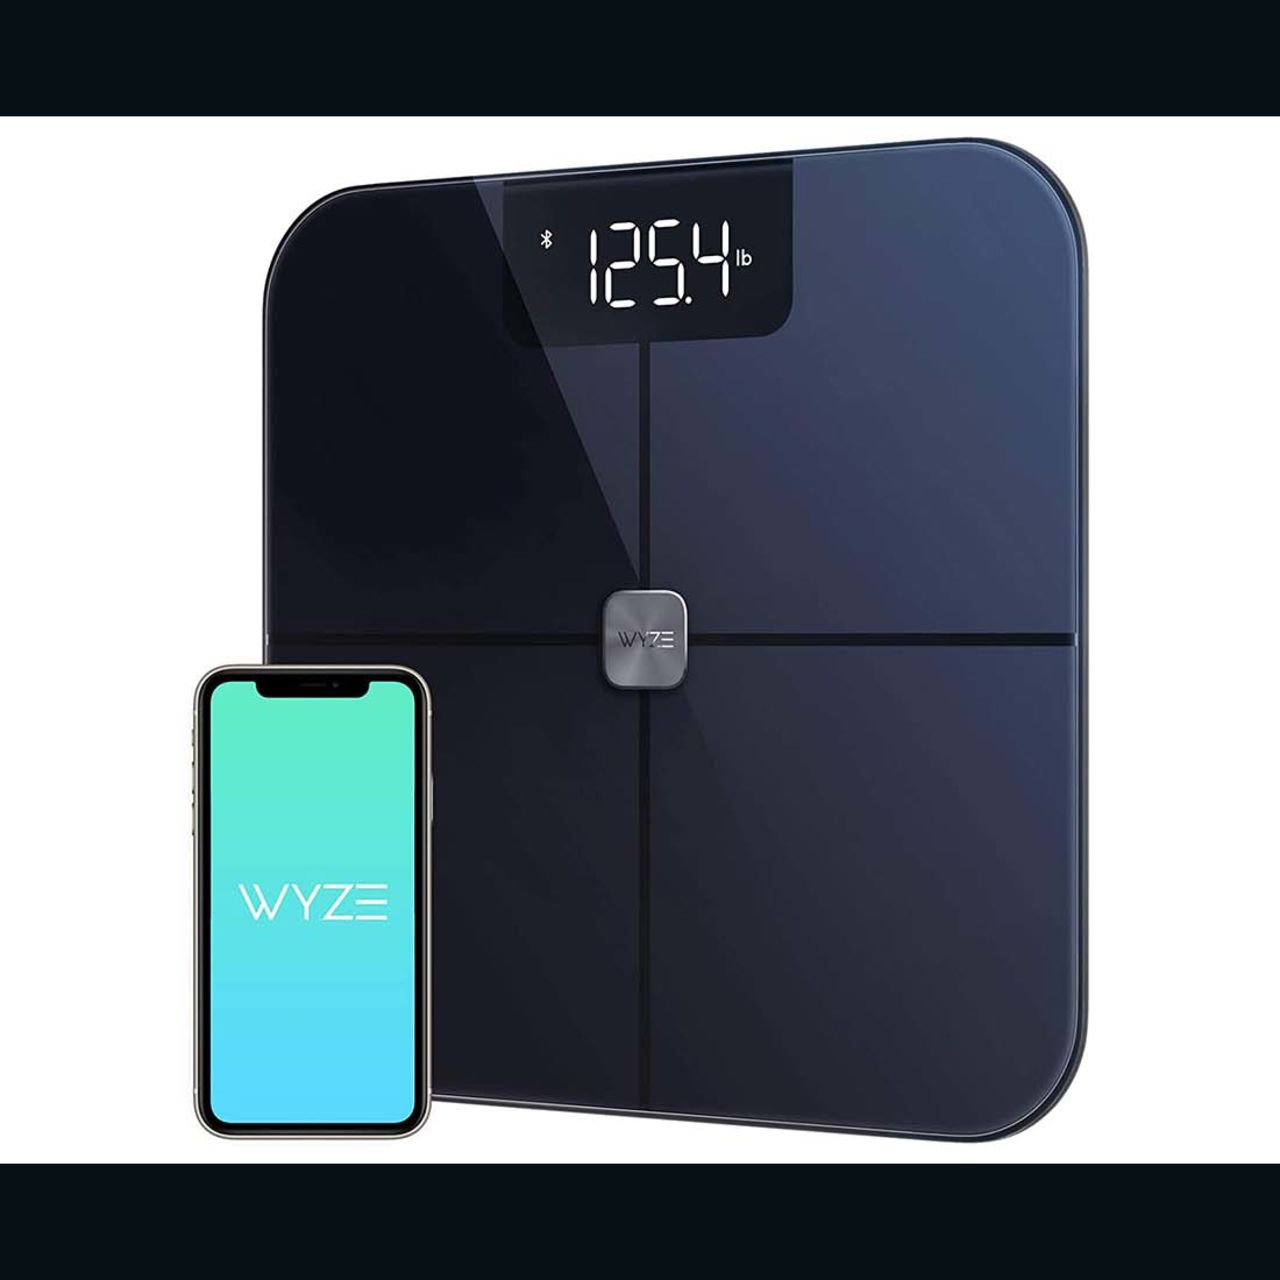 I tried using Anker's smart weight and body composition meter 'Eufy Smart  Scale P3' that can easily measure 16 items such as body fat percentage and  muscle mass that you are interested